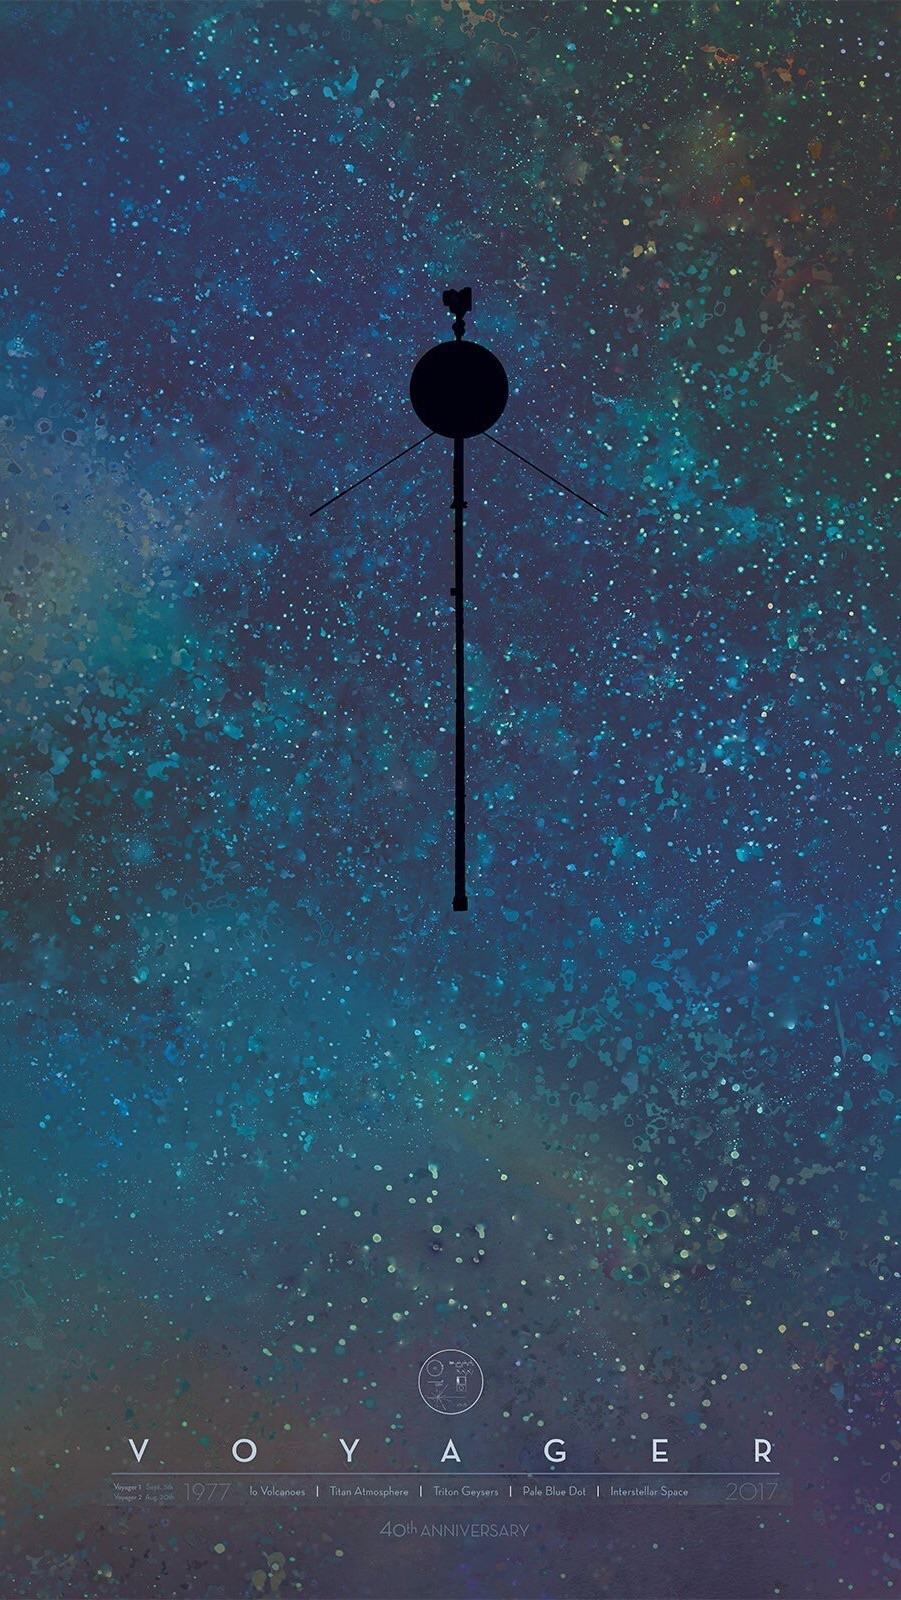 Voyager 40th Anniversary iPhone wallpaper